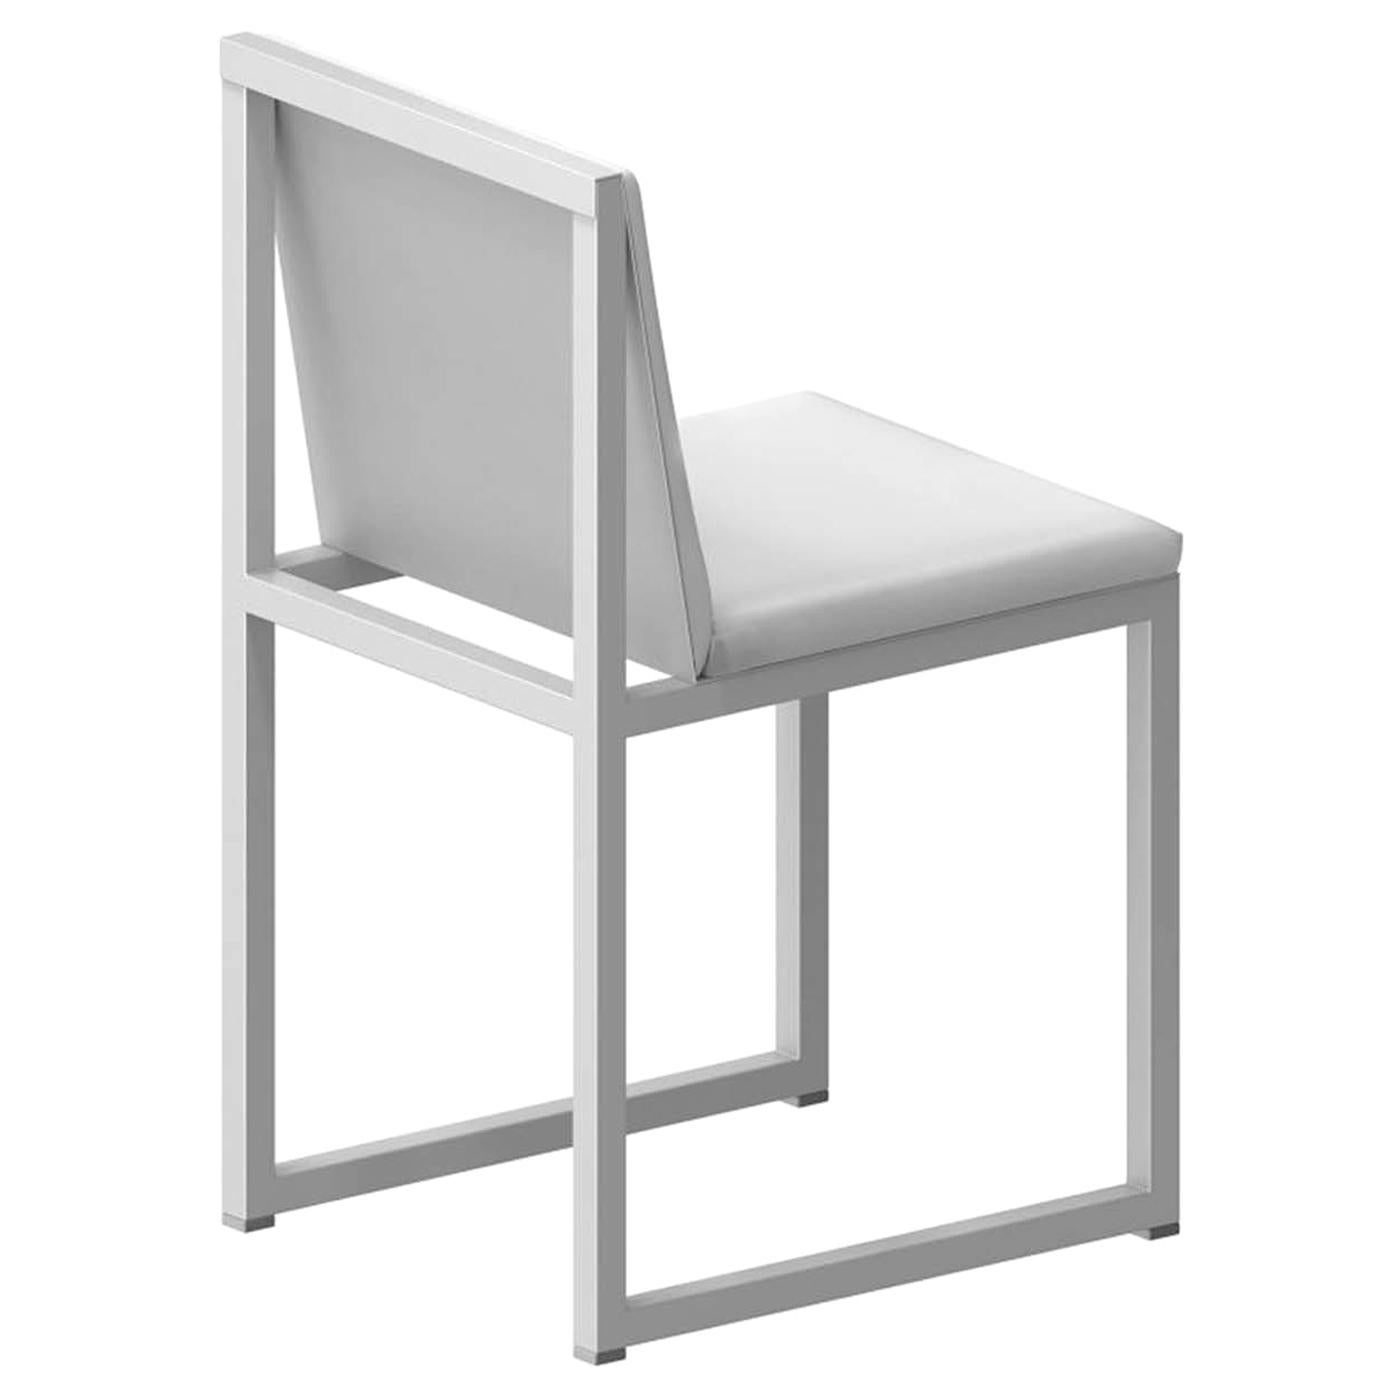 Teresa Soft Set of 2 Chairs by Maurizio Peregalli For Sale